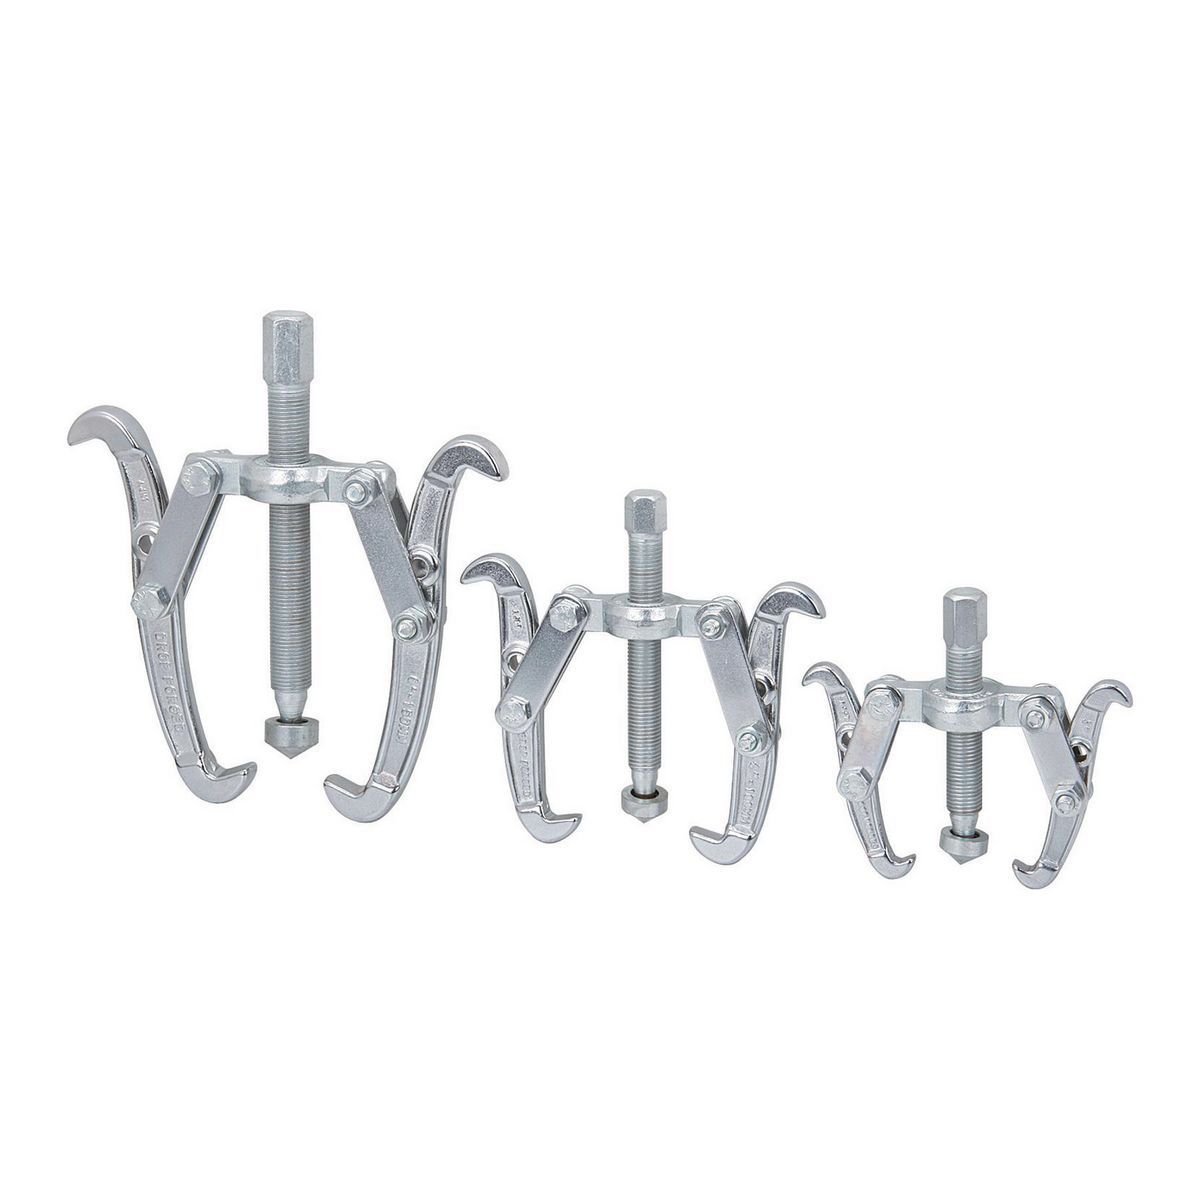 Two-Jaw Puller Set, 3 Piece